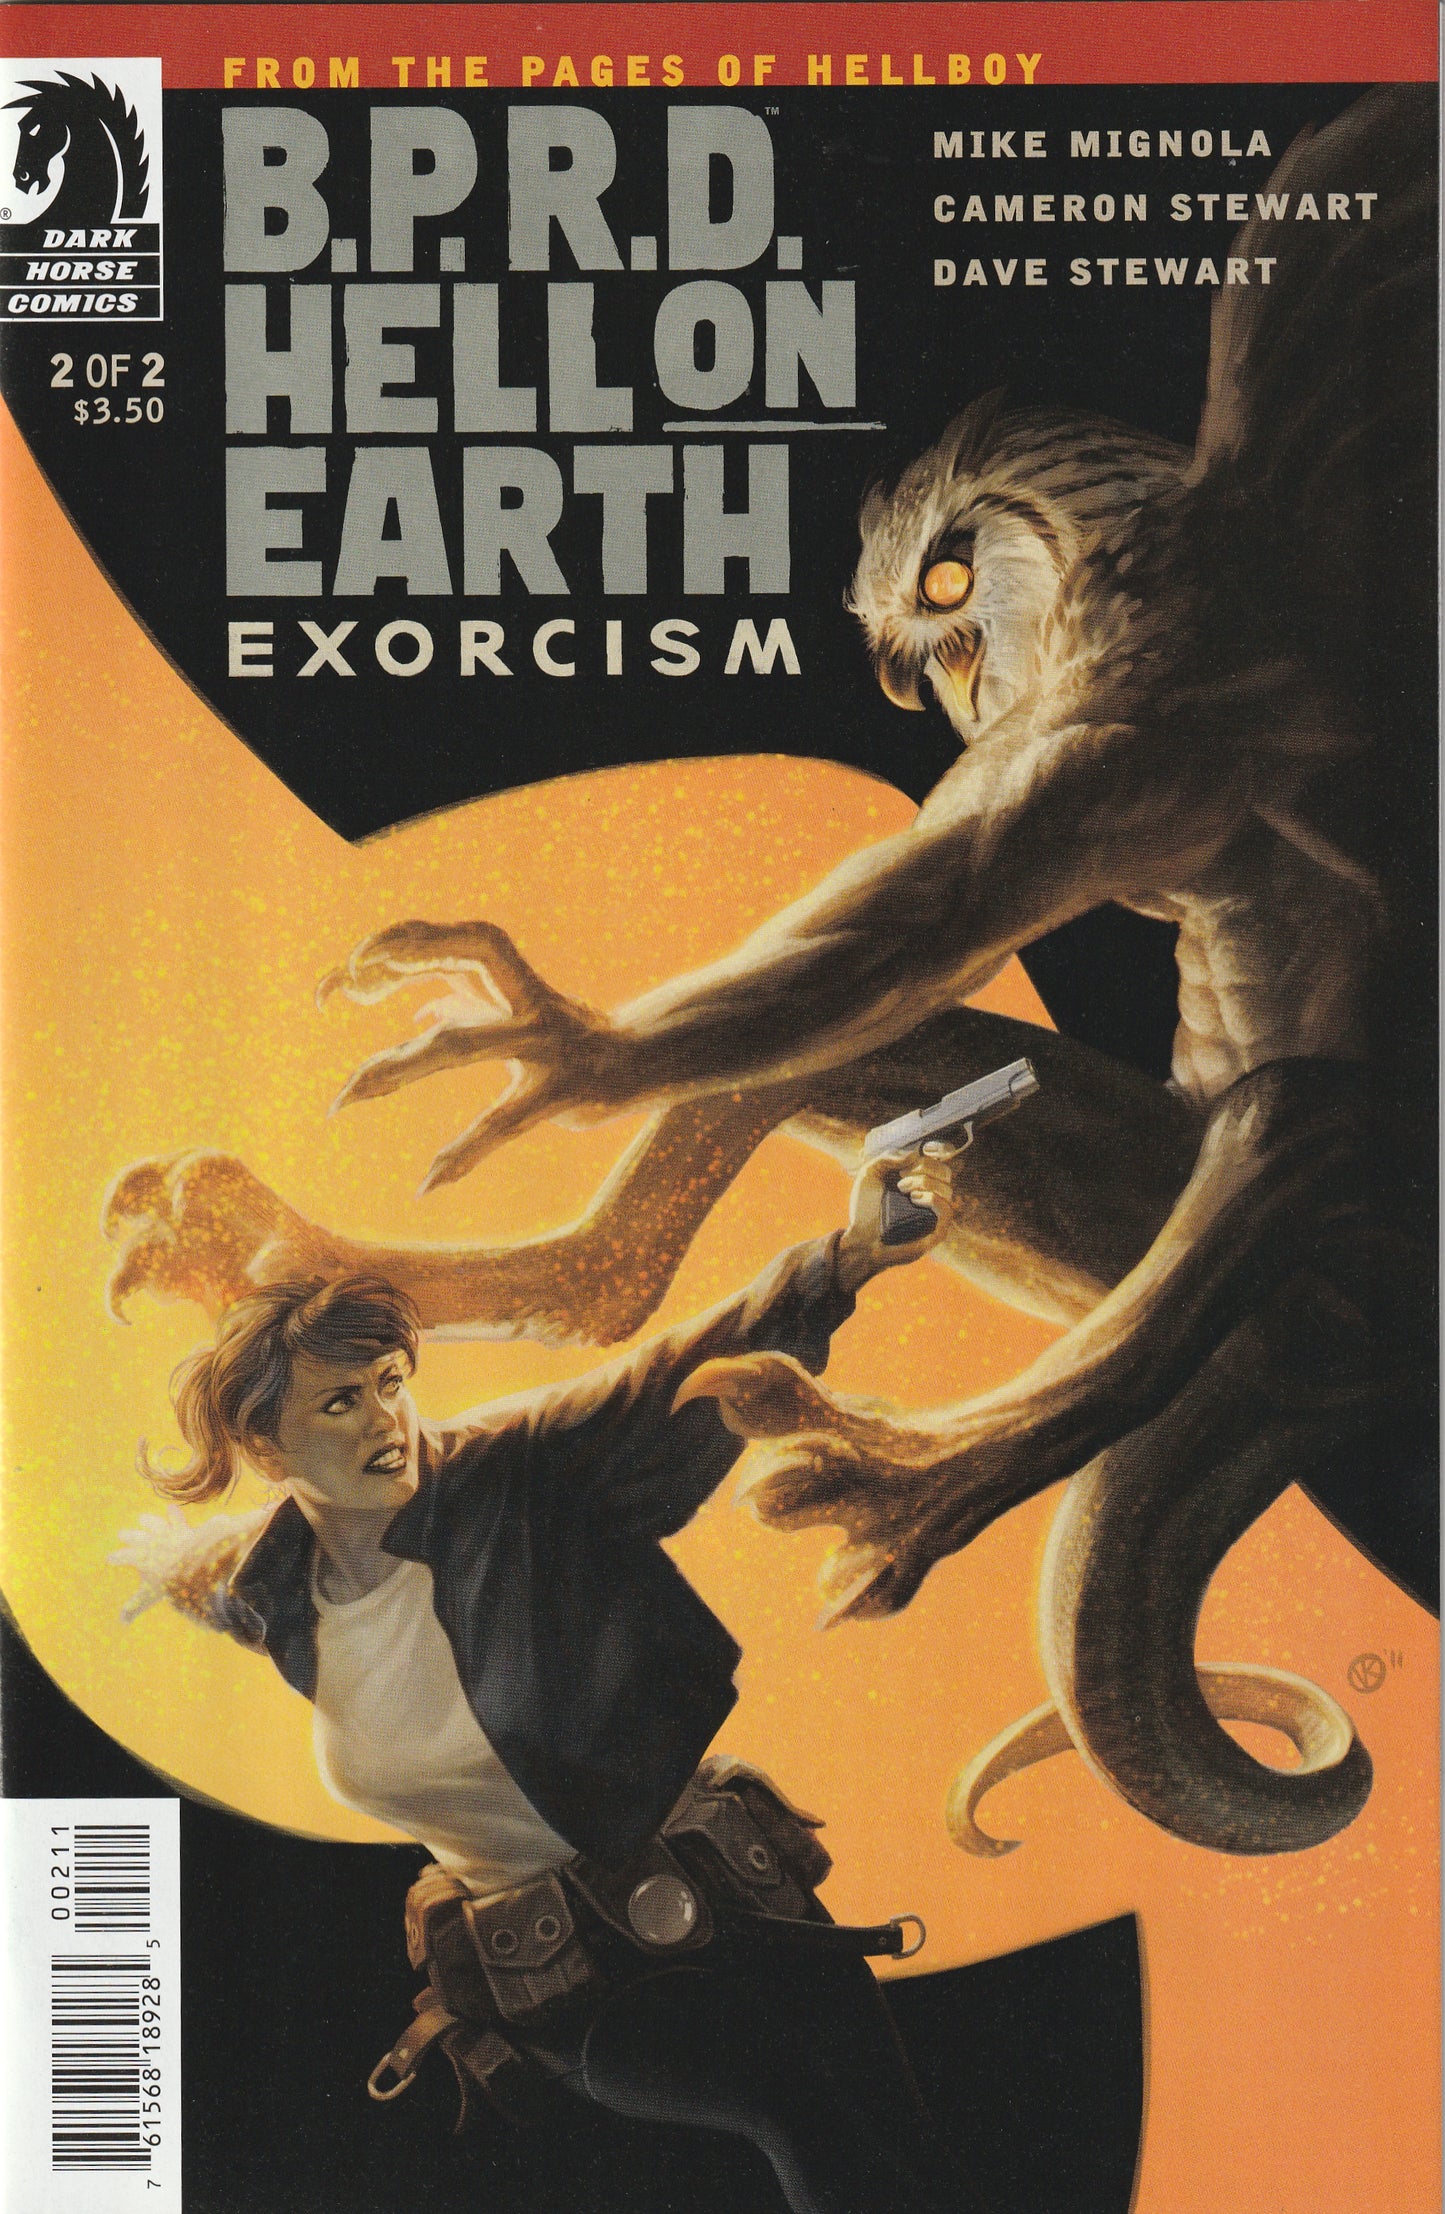 B.P.R.D. Hell on Earth: Exorcism (2012) - 2 issue mini series